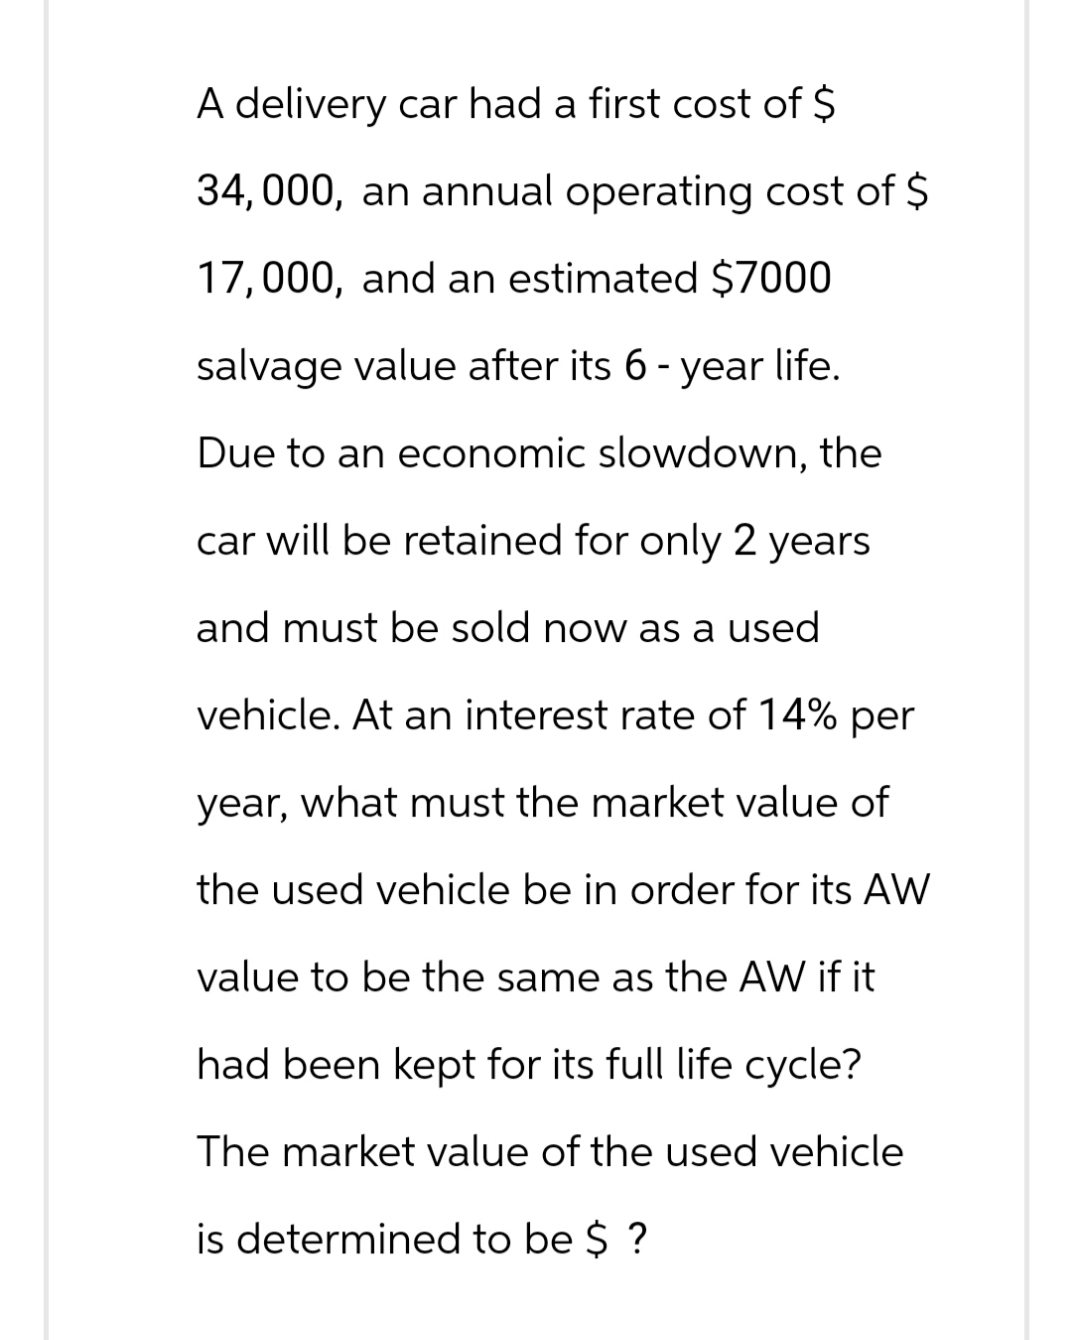 A delivery car had a first cost of $
34,000, an annual operating cost of $
17,000, and an estimated $7000
salvage value after its 6 - year life.
Due to an economic slowdown, the
car will be retained for only 2 years
and must be sold now as a used
vehicle. At an interest rate of 14% per
year, what must the market value of
the used vehicle be in order for its AW
value to be the same as the AW if it
had been kept for its full life cycle?
The market value of the used vehicle
is determined to be $ ?